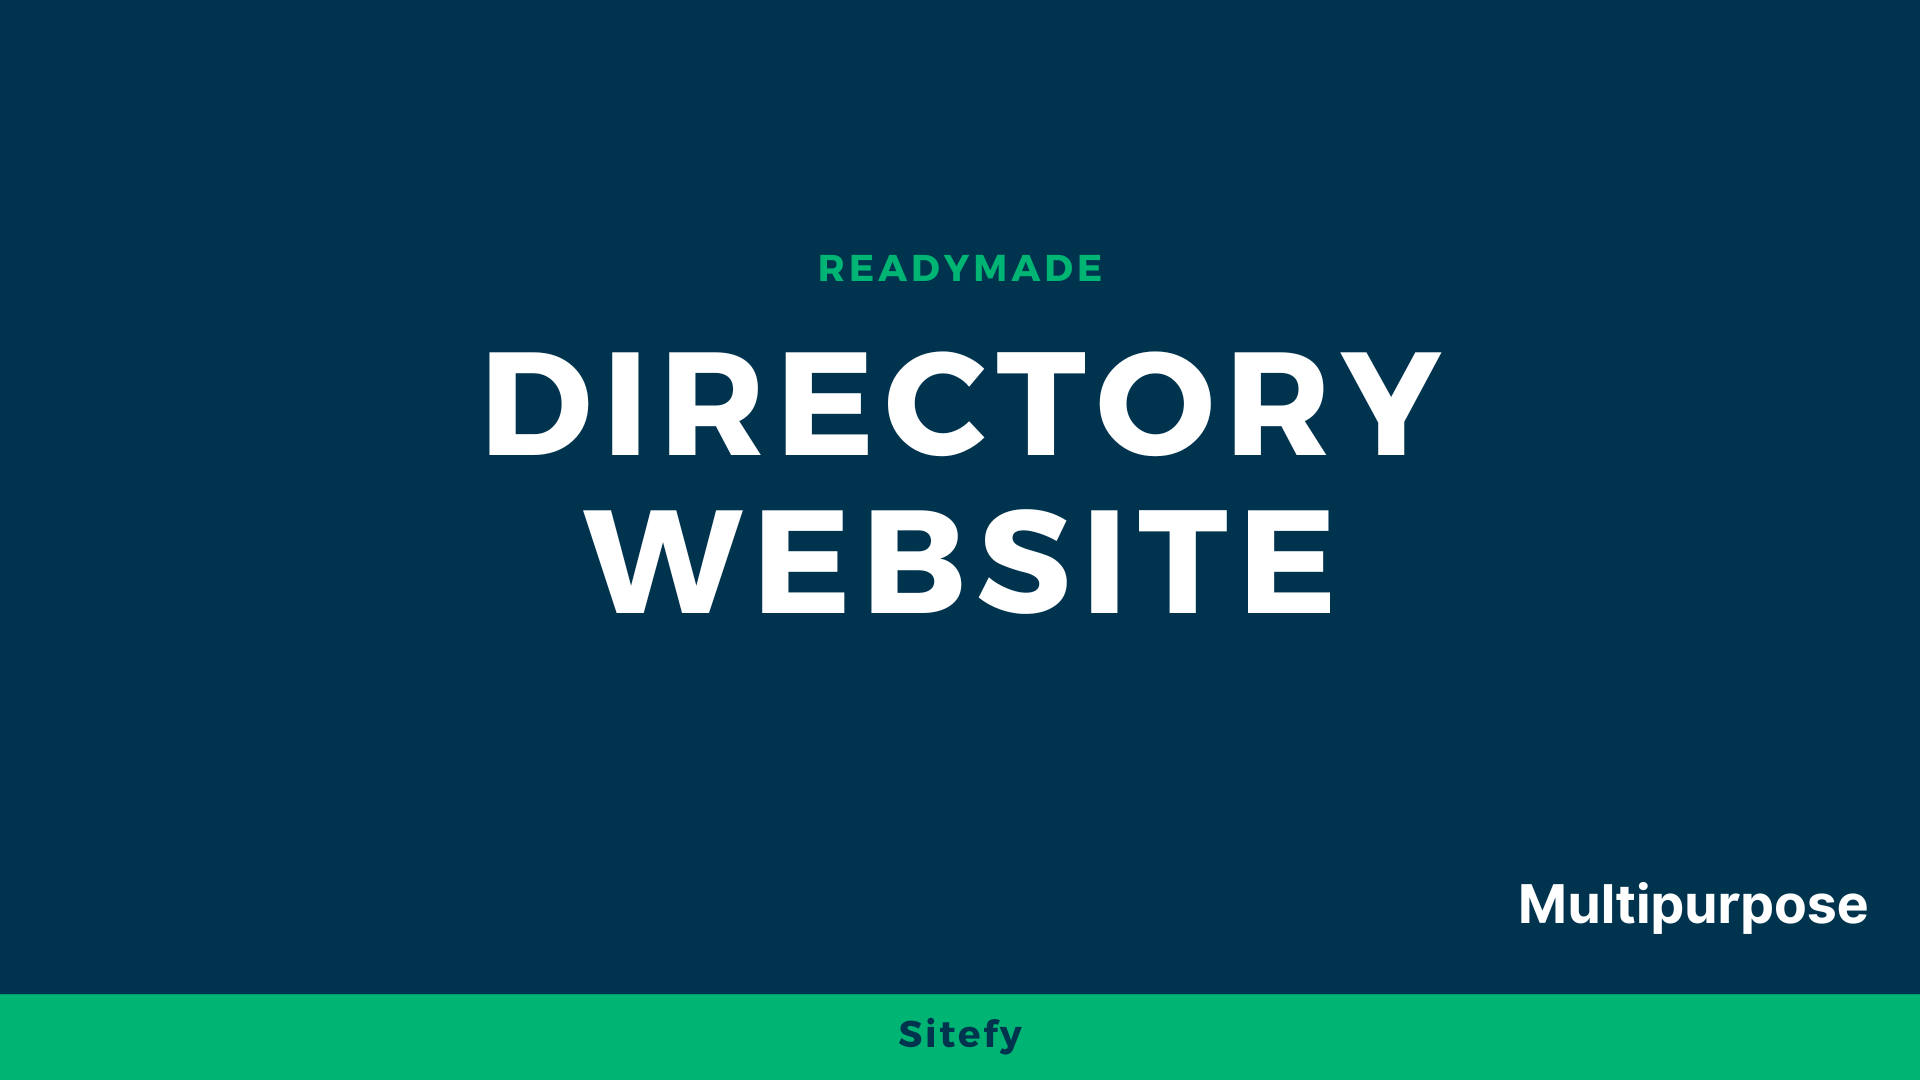 Readymade Directory Website for Sale